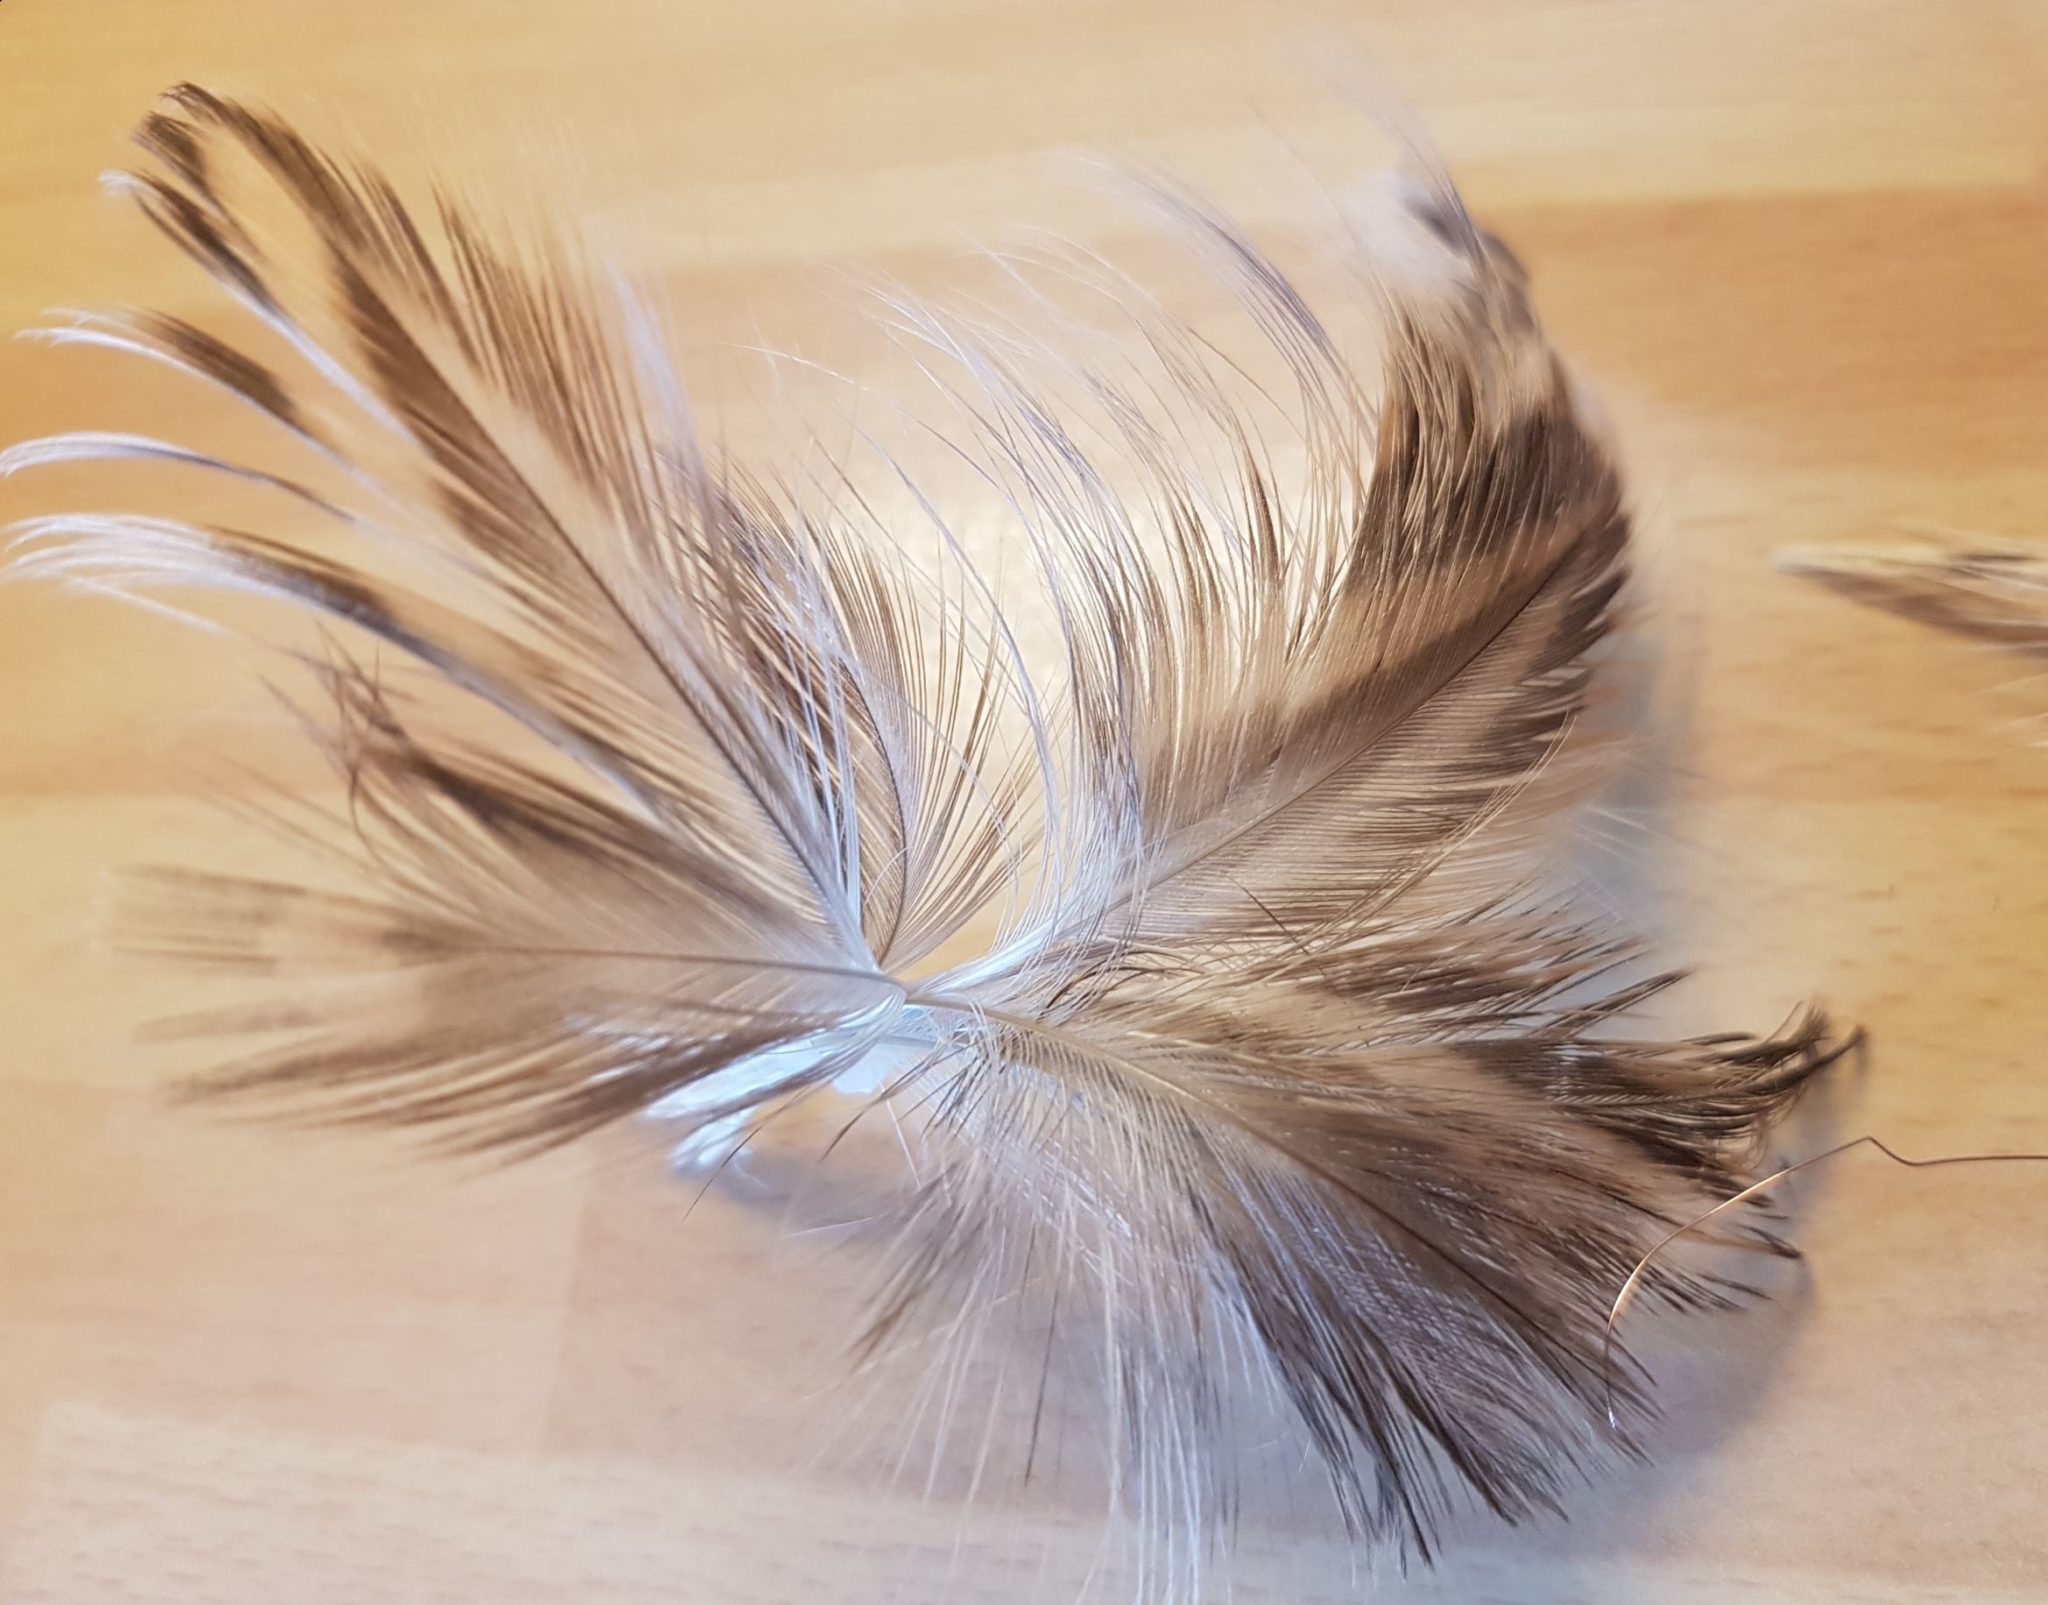 Spey hackle fly mouche flytying tying feather plume pheasant faisan malladr duck oie gooz=se swan cygne eclosion